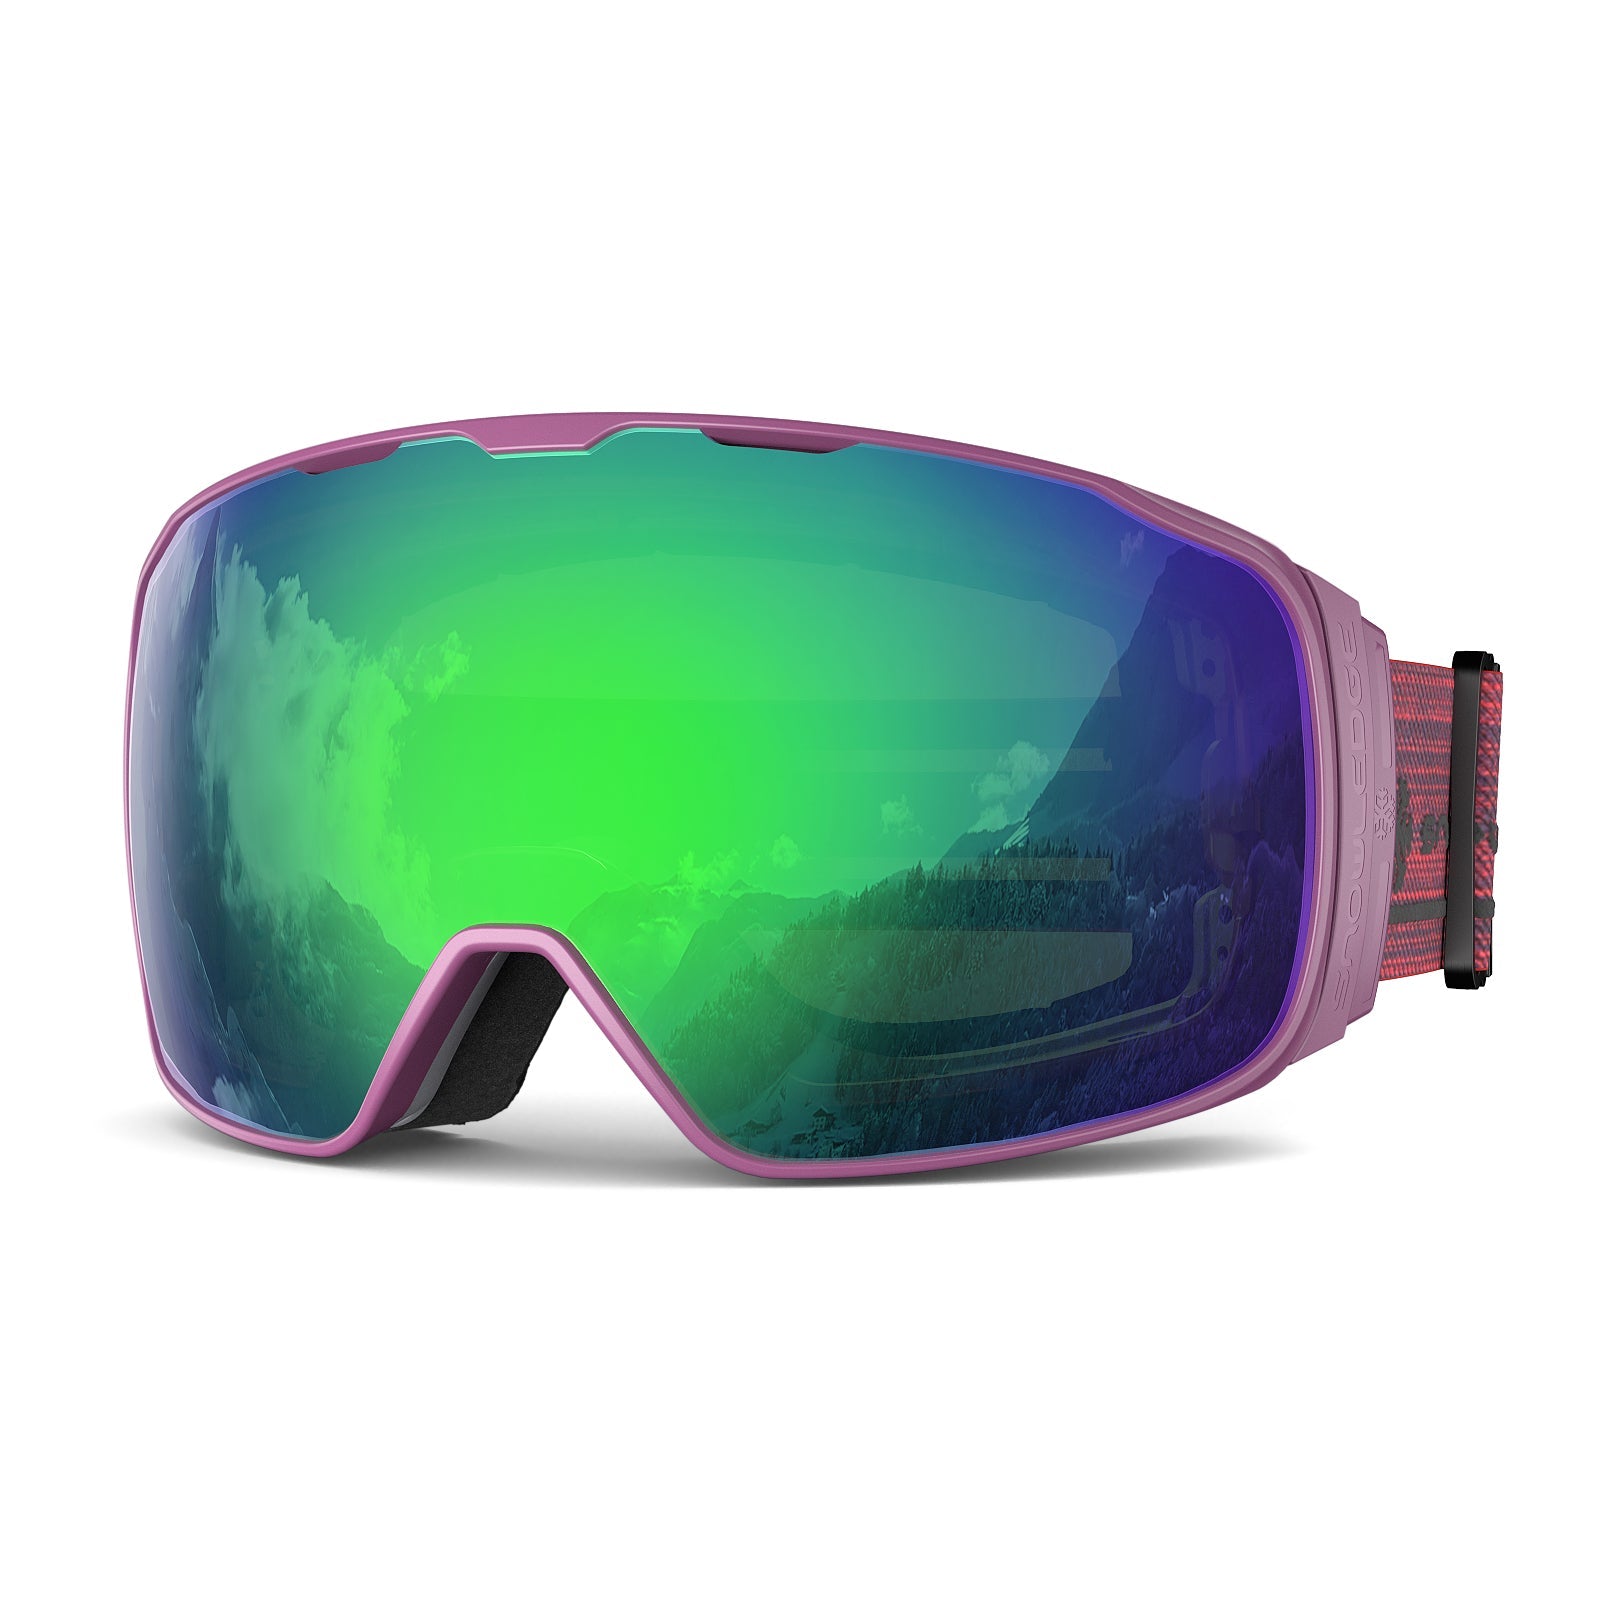 Dropship Snowledge Ski Goggles-Snow Snowboard Goggles OTG For Men Women  Adult, Anti Fog 100% UV Protection to Sell Online at a Lower Price